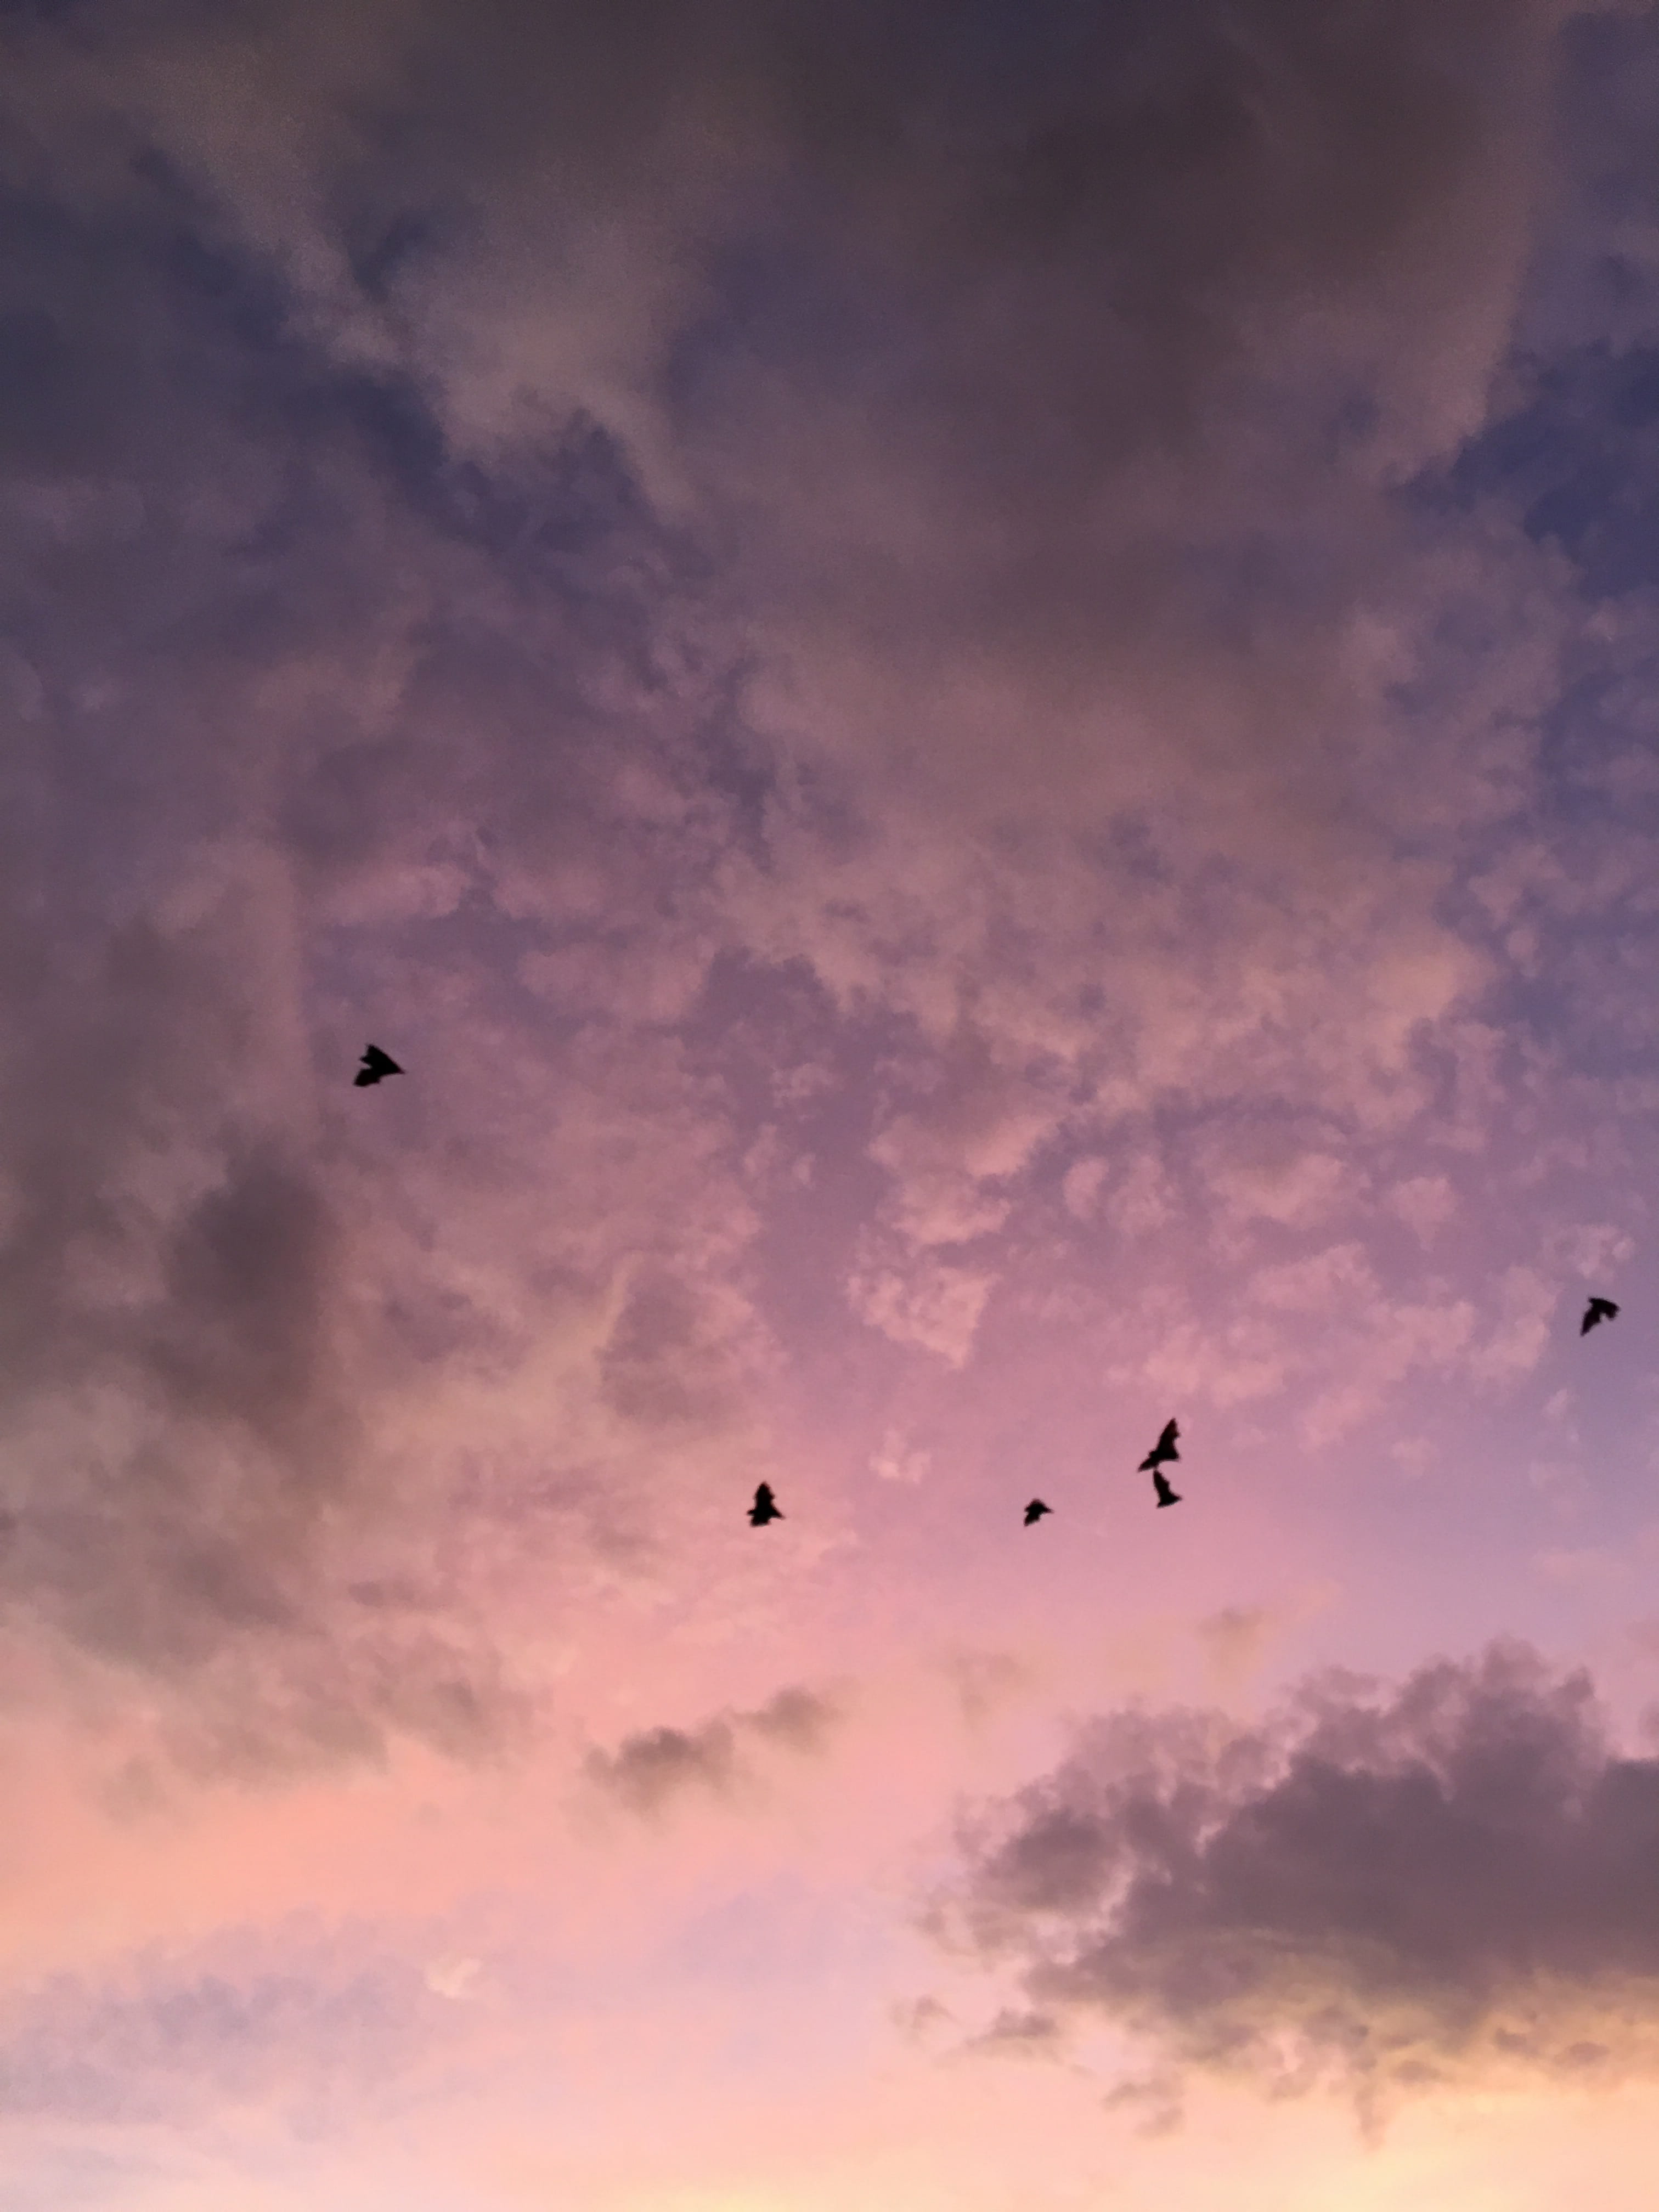 A flock of birds flying in a cloudy sky at sunset. - 